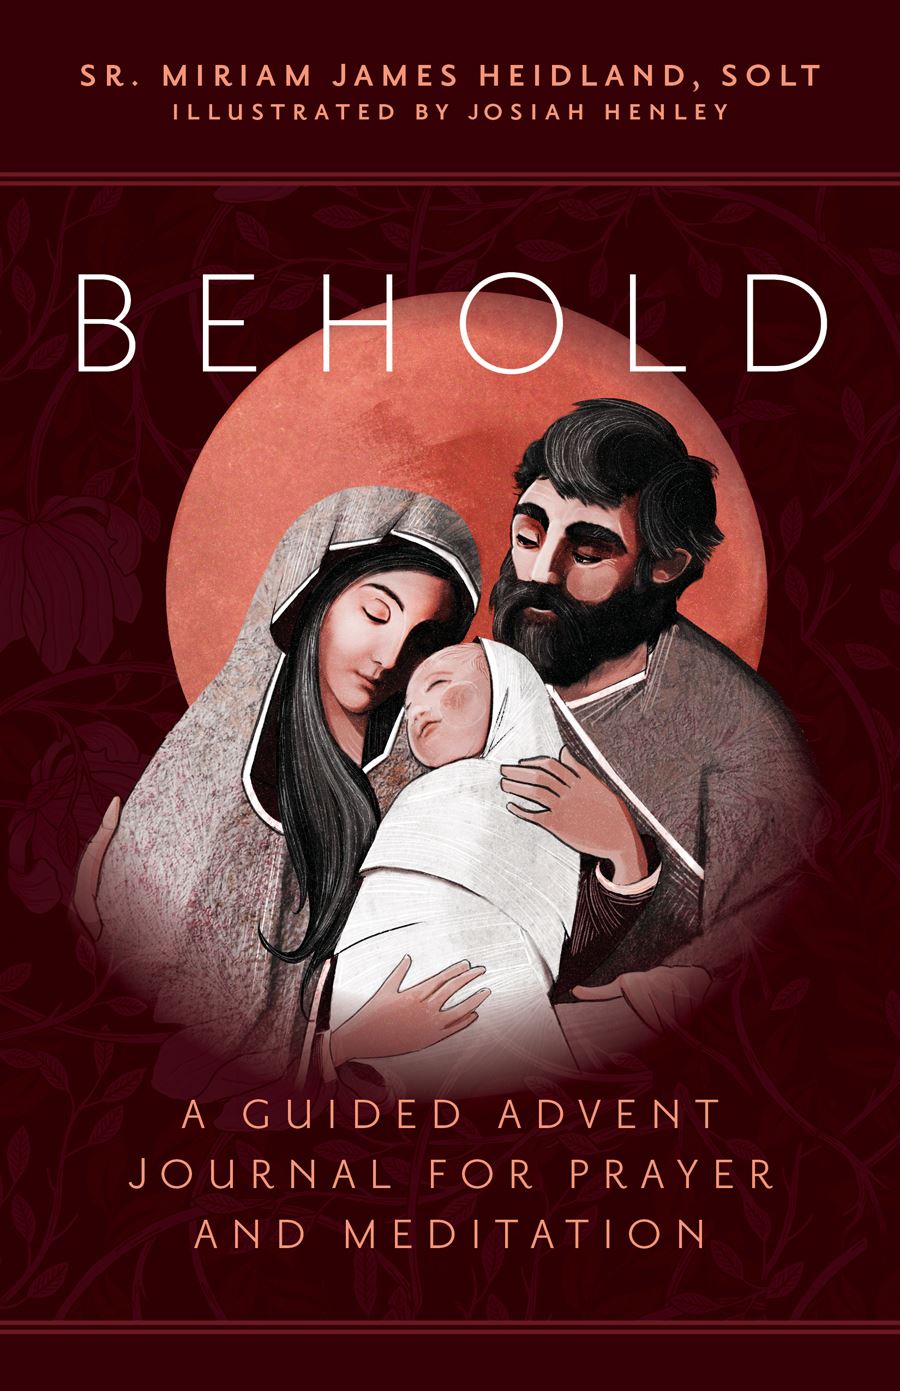 Behold A Guided Advent Journal for Prayer and Meditation Author: Sr. Miriam James Heidland, SOLT Illustrated by: Josiah Henley